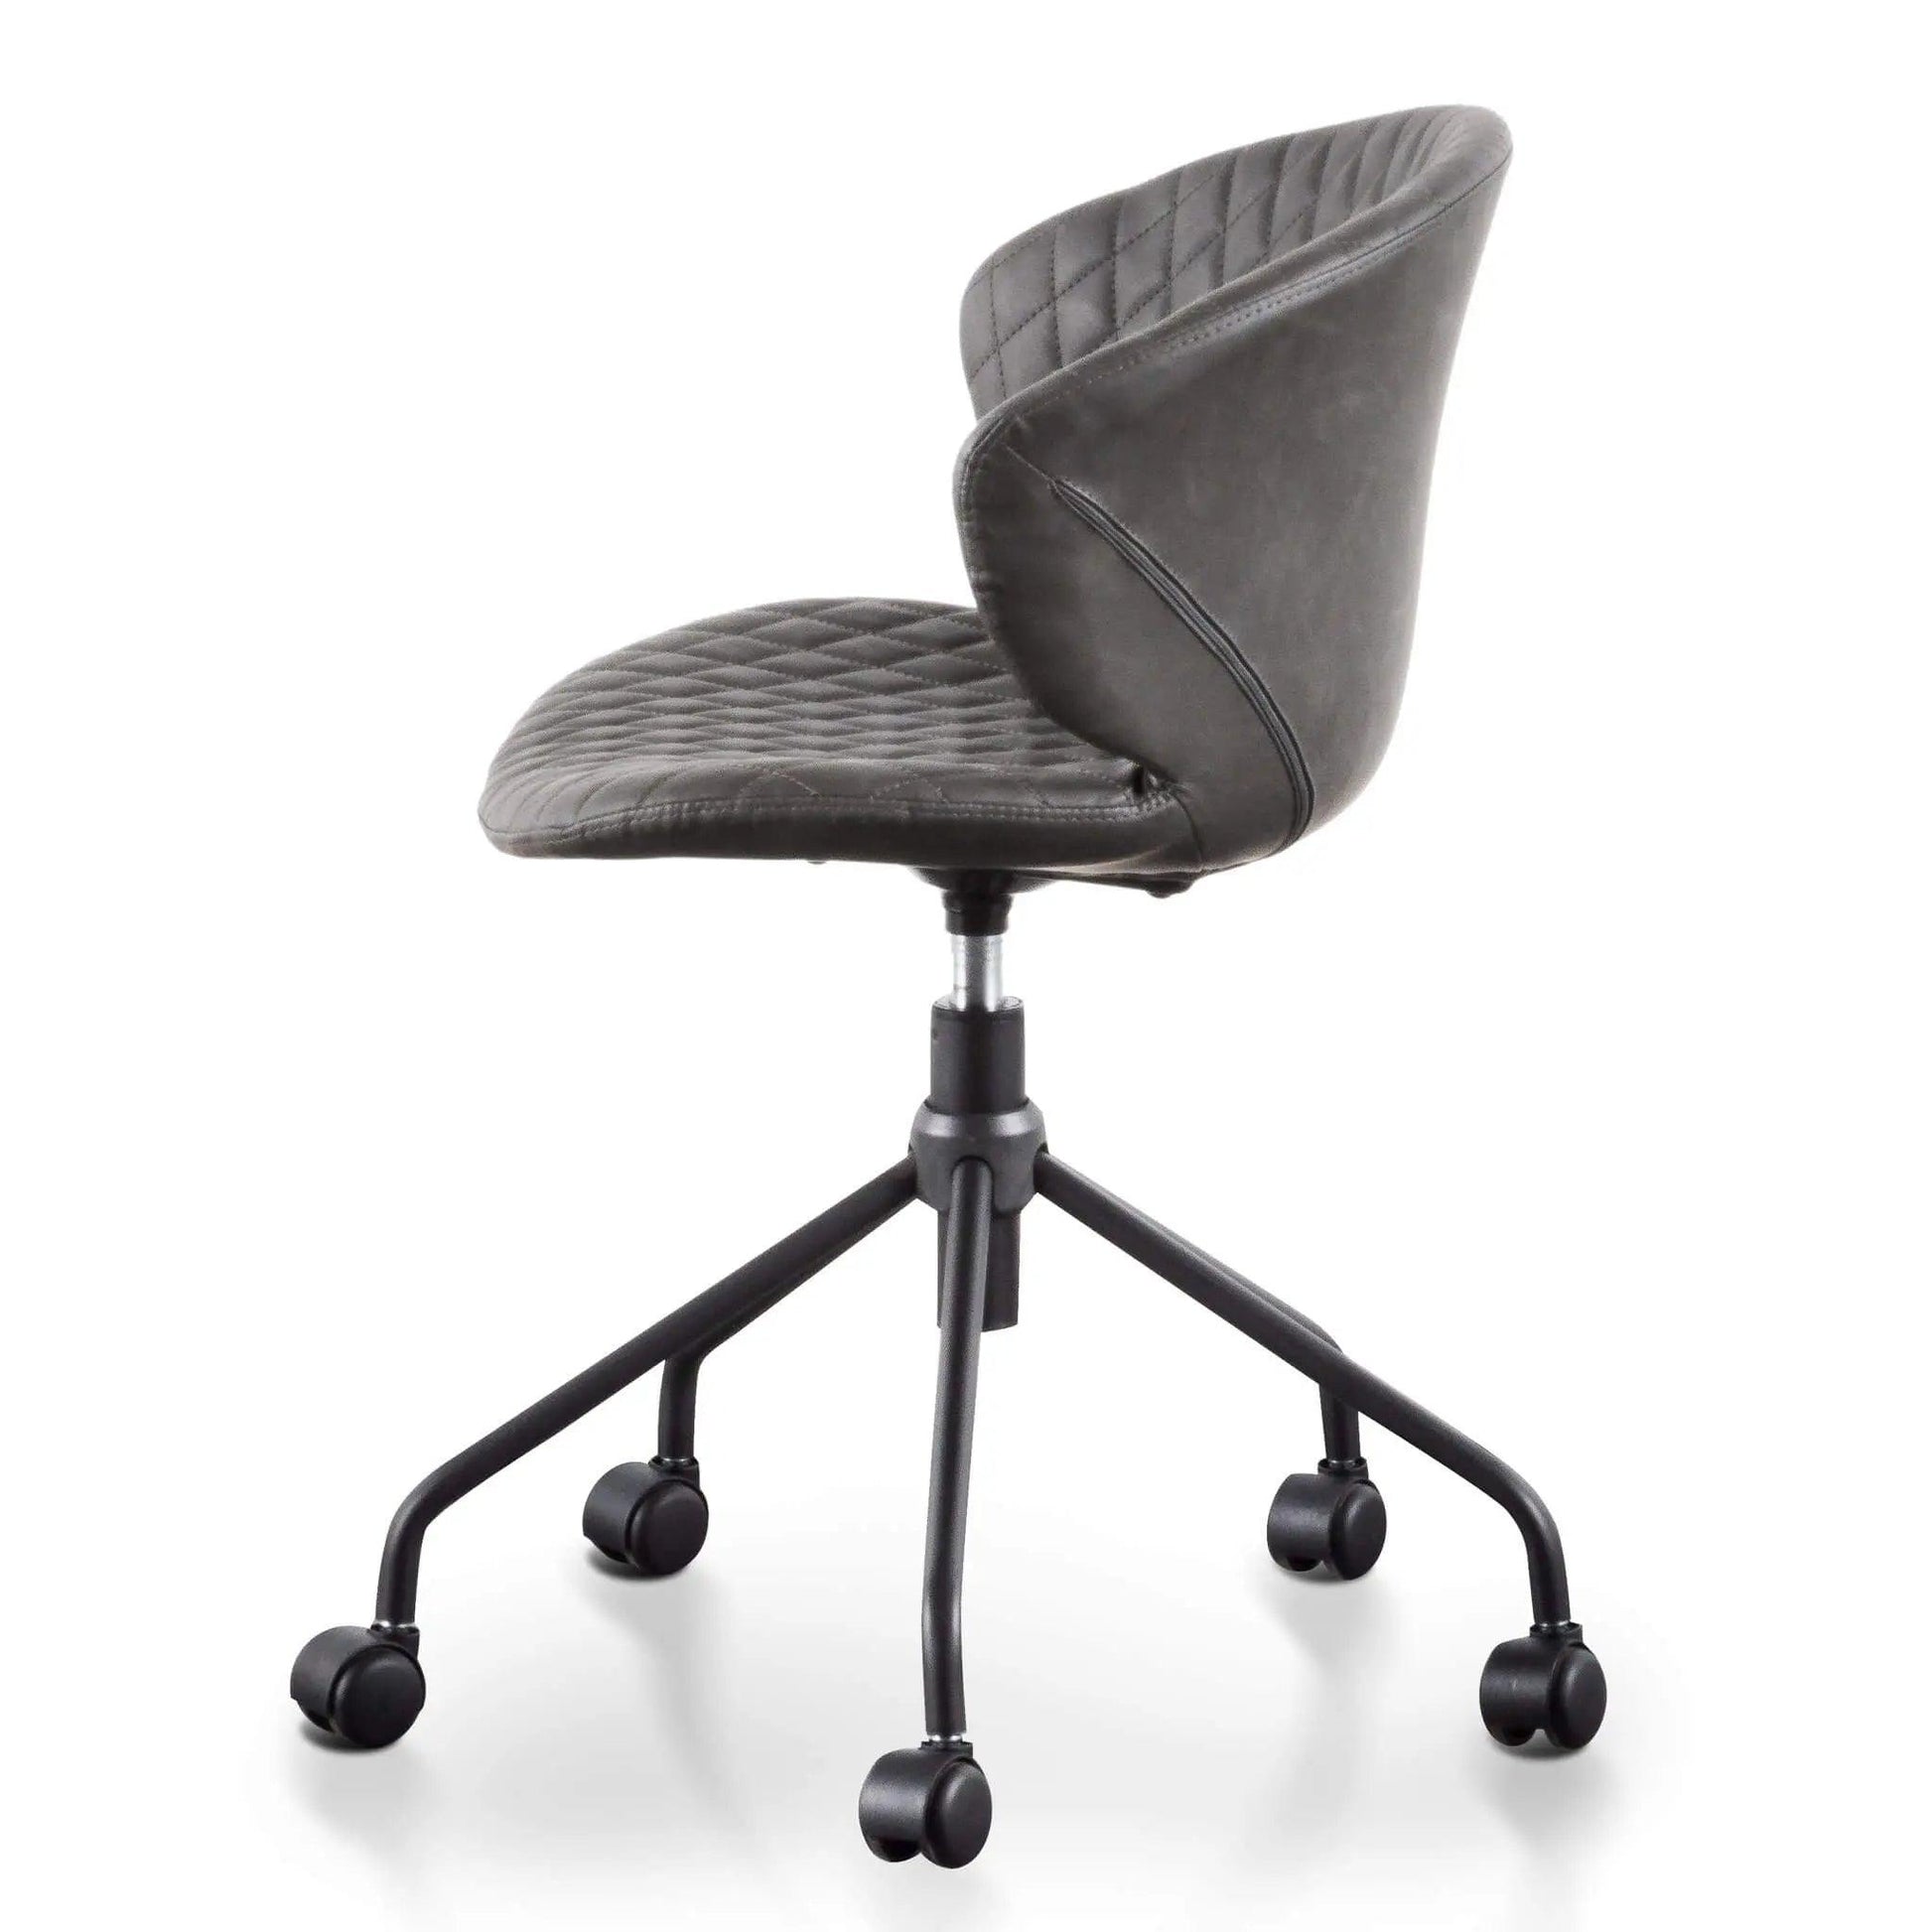 Calibre Office Chair - Charcoal with Black Base OC6192-LF - Office/Gaming ChairsOC6192-LF 3